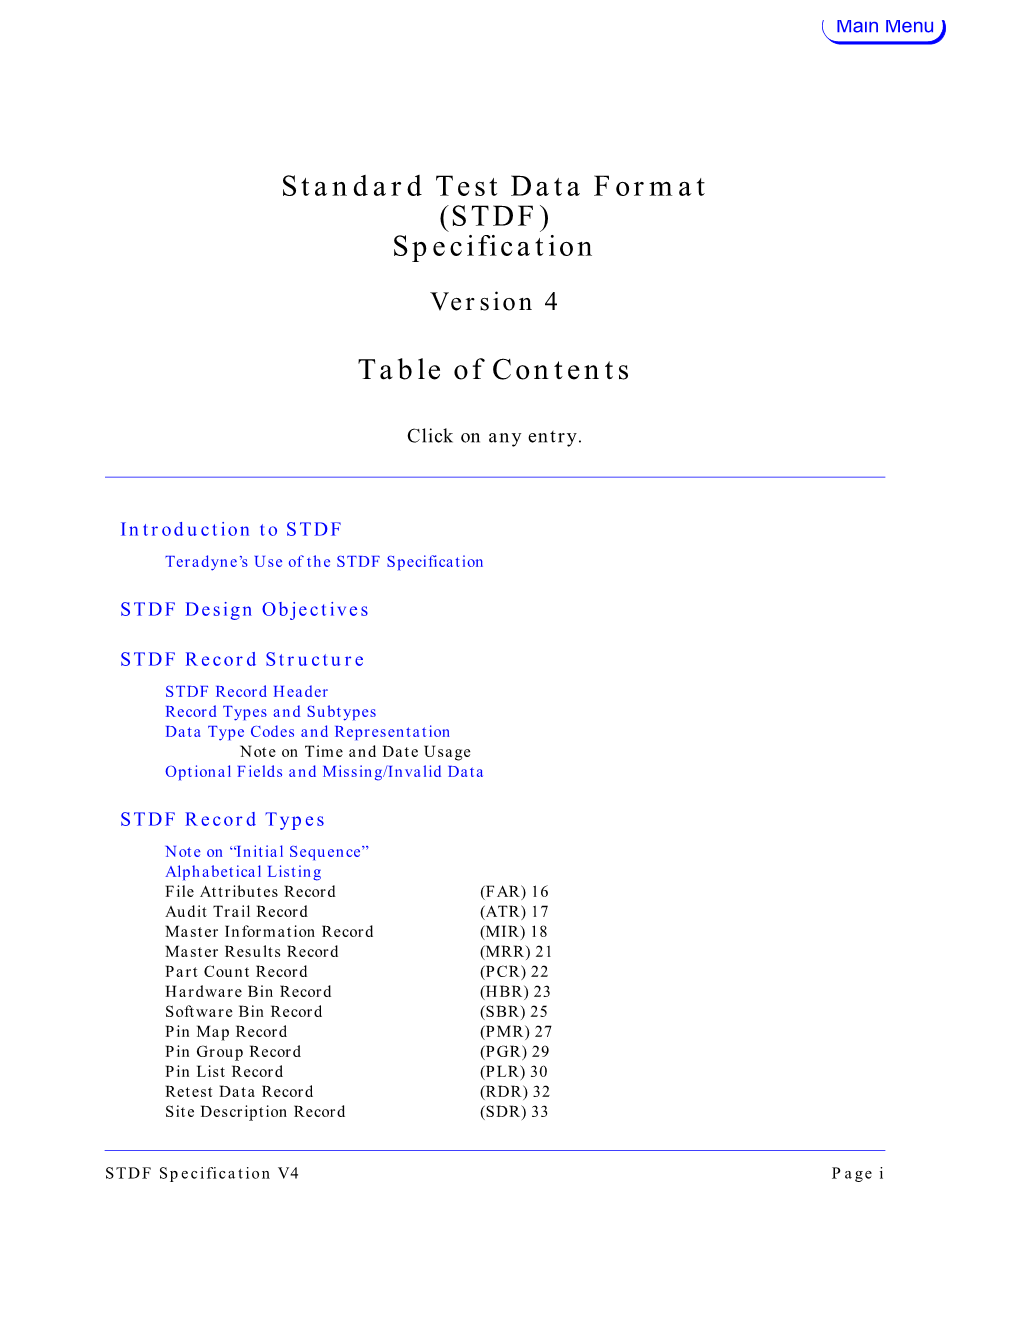 Standard Test Data Format (STDF) Specification Table of Contents